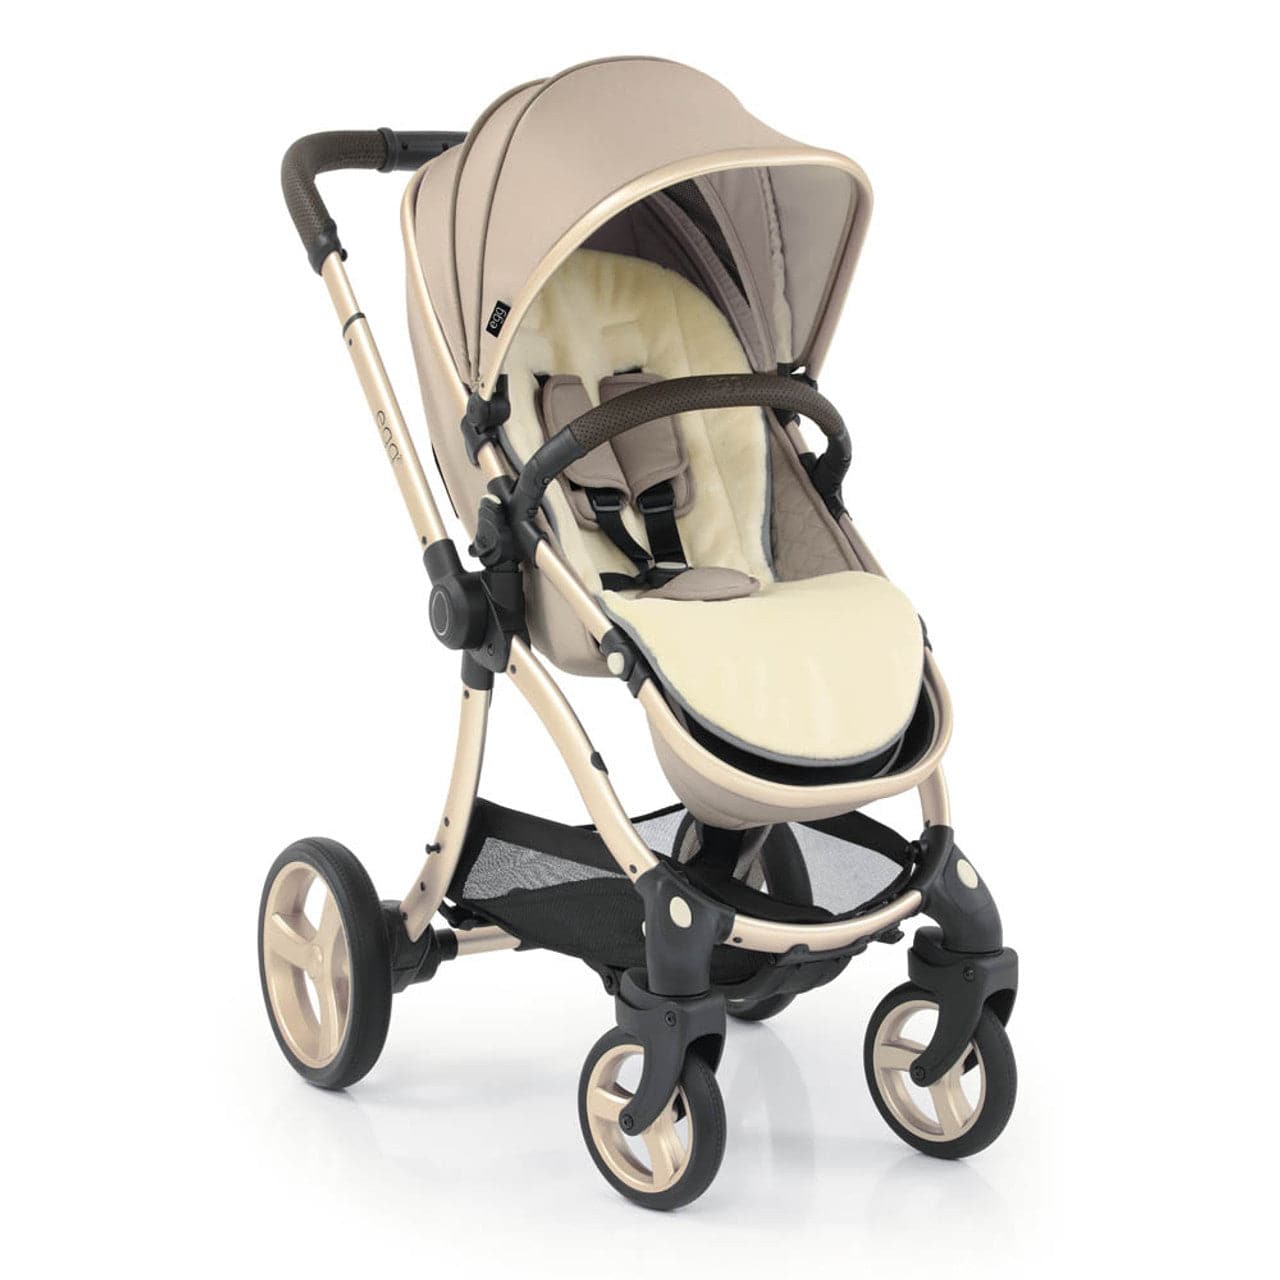 Egg® 2 Pushchair With Seat Liner - Feather - For Your Little One